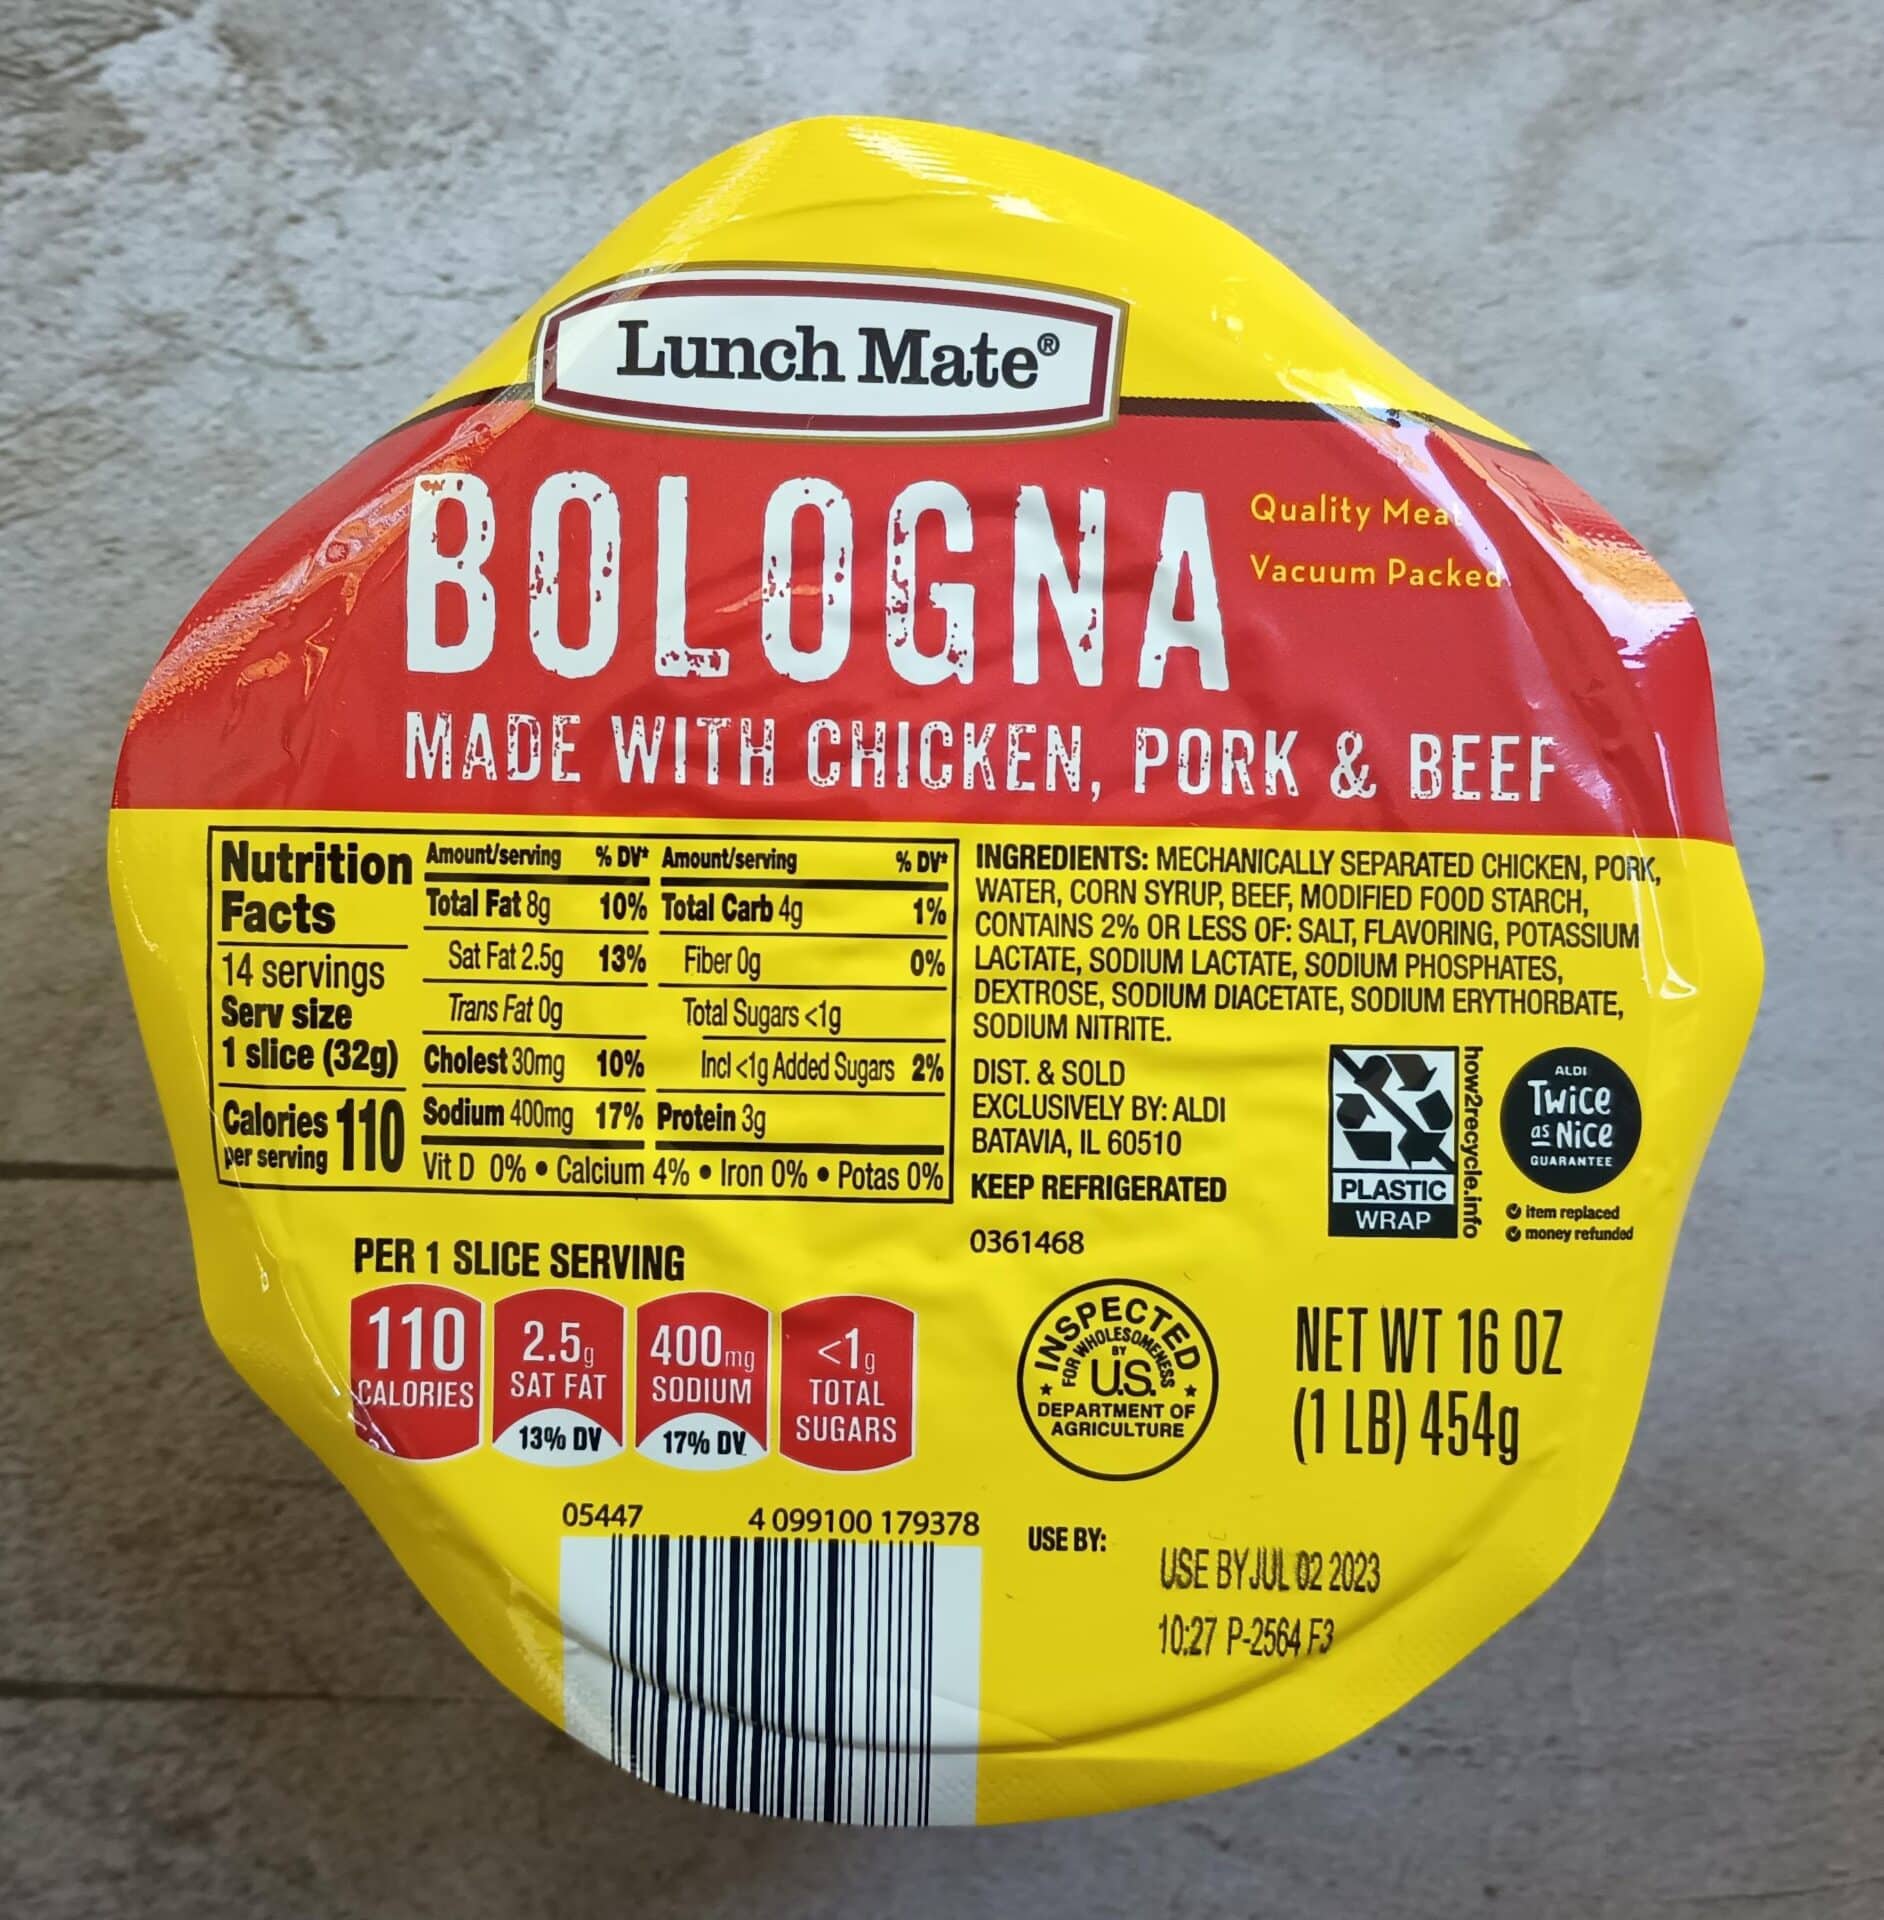 Lunch Mate Bologna